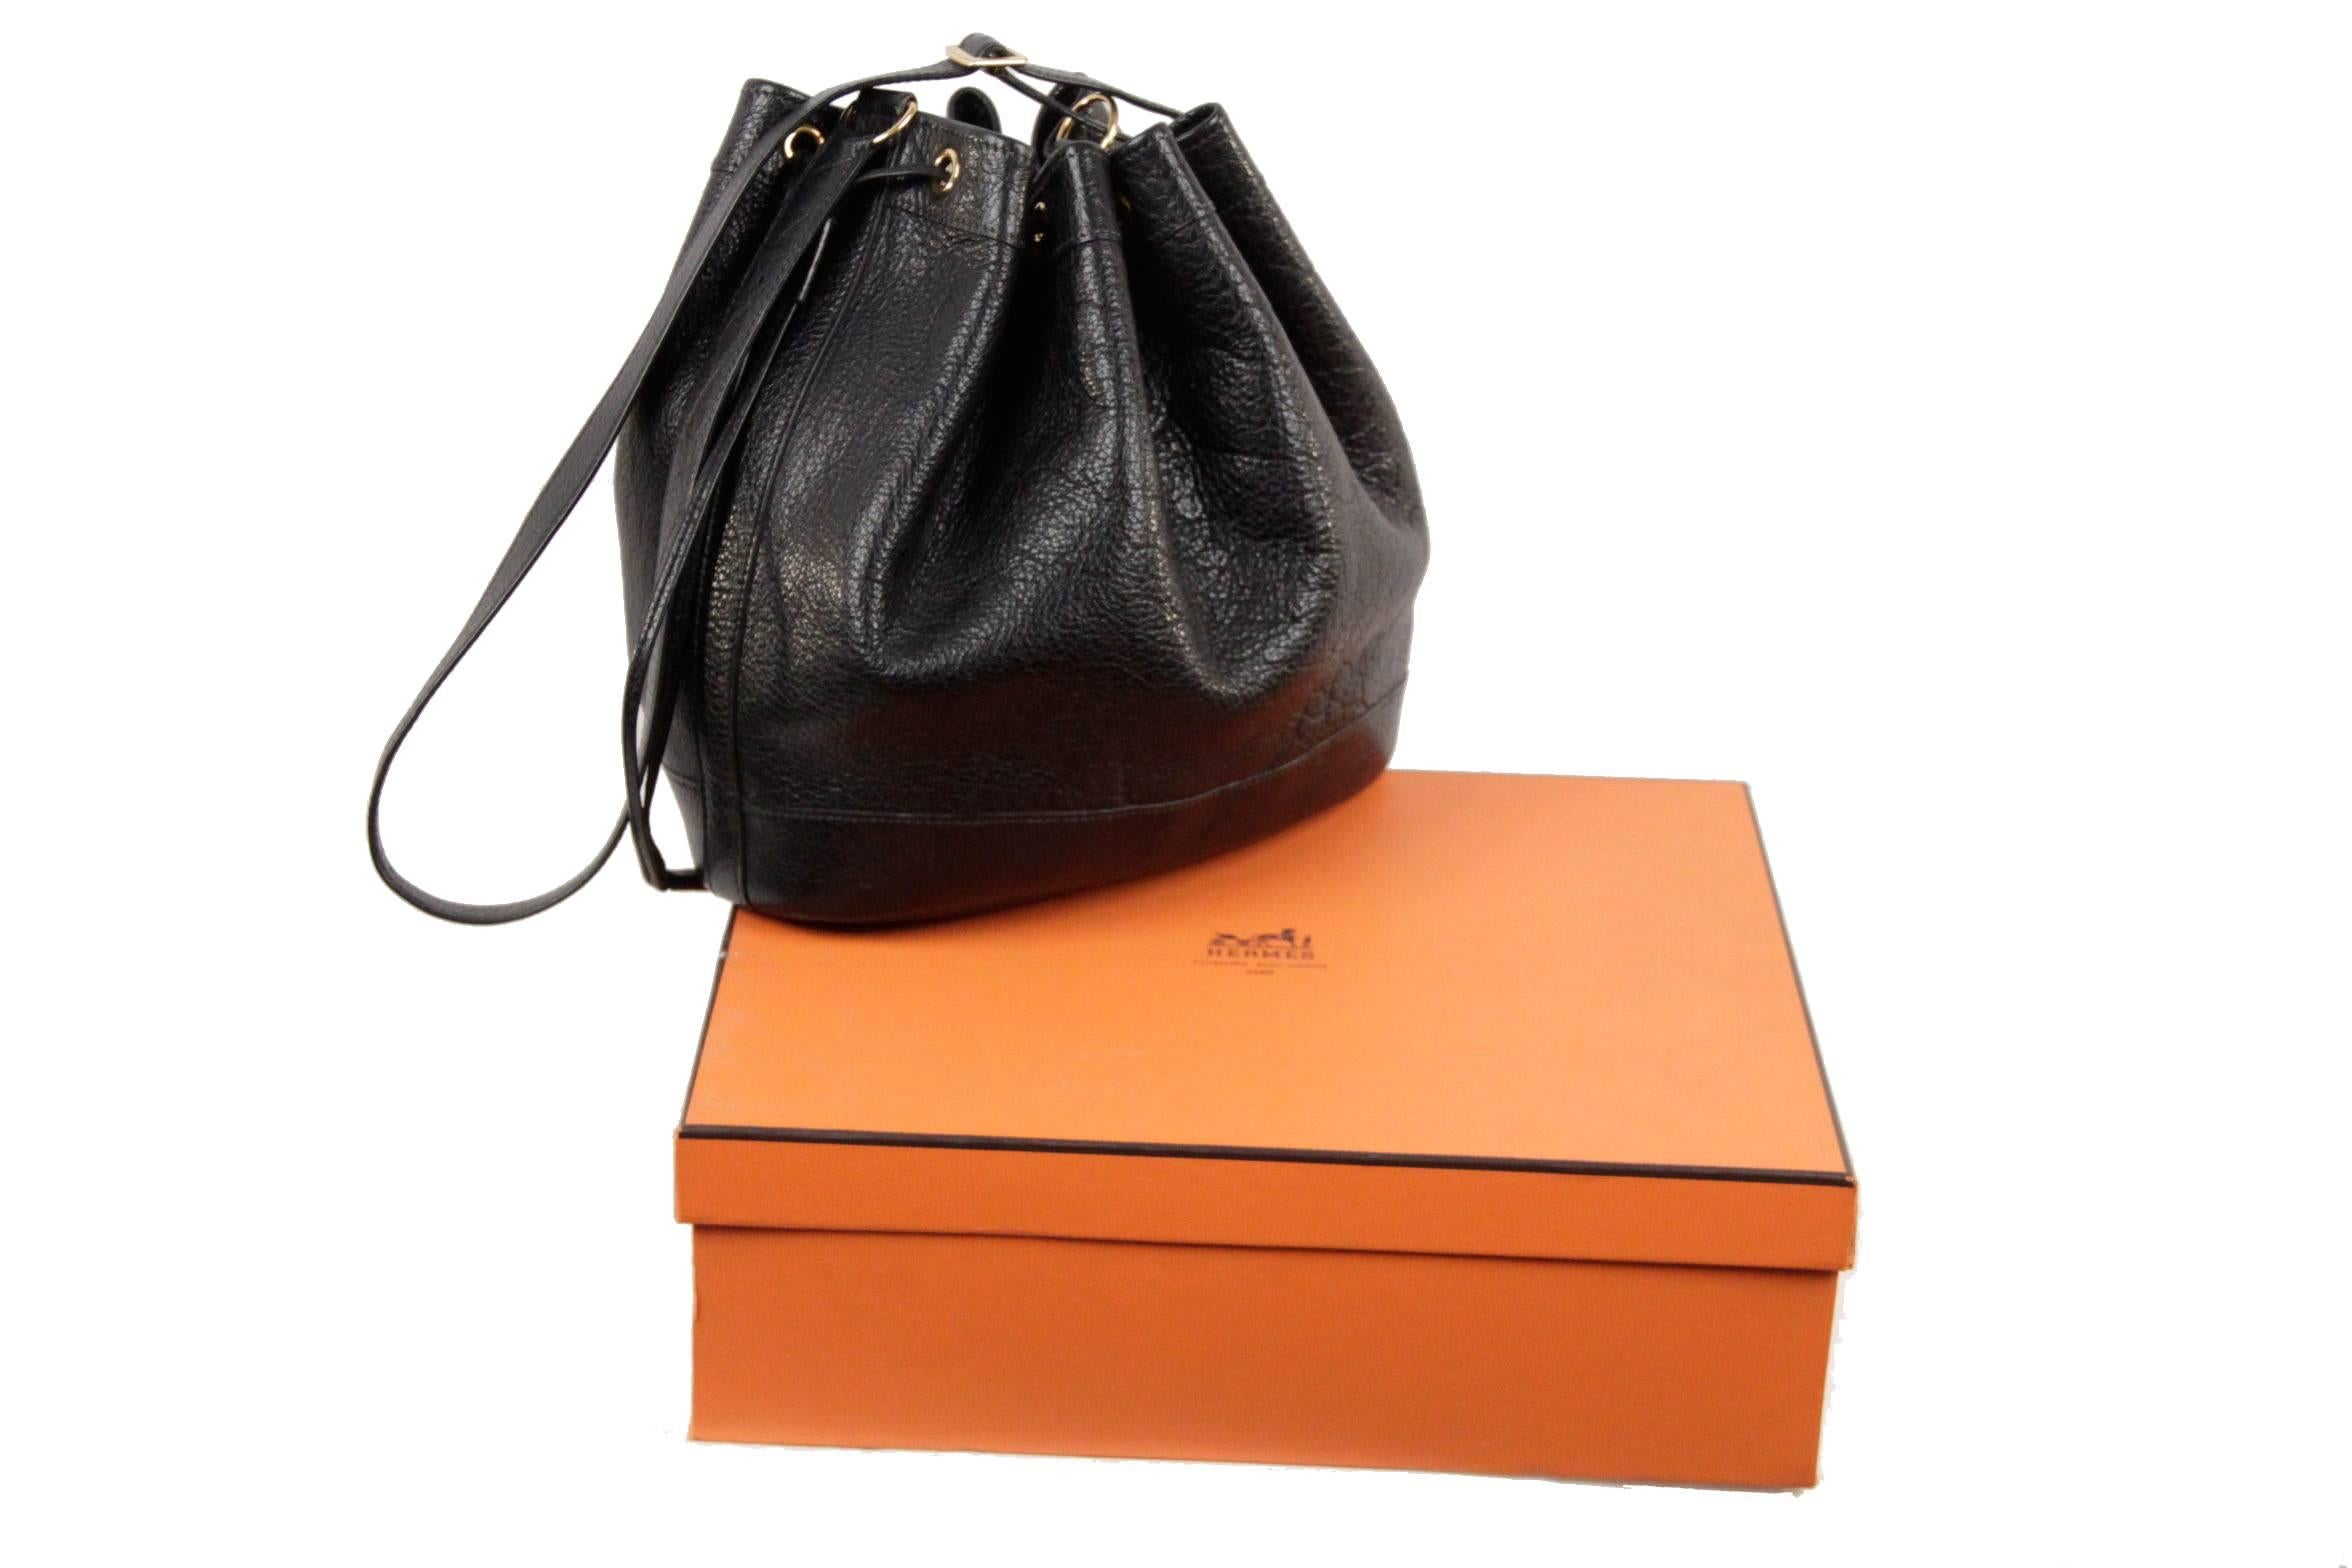 
- Hermès Vintage Leather 'Market' Bucket Bag
- Genuine Black leather
- Drawstring fasten with tassel detailing
- Adjustable leather strap
- Gold tone buckle
- Stitched detail
- Unlined
- Comes with a HERMES Orange box
- Approx.